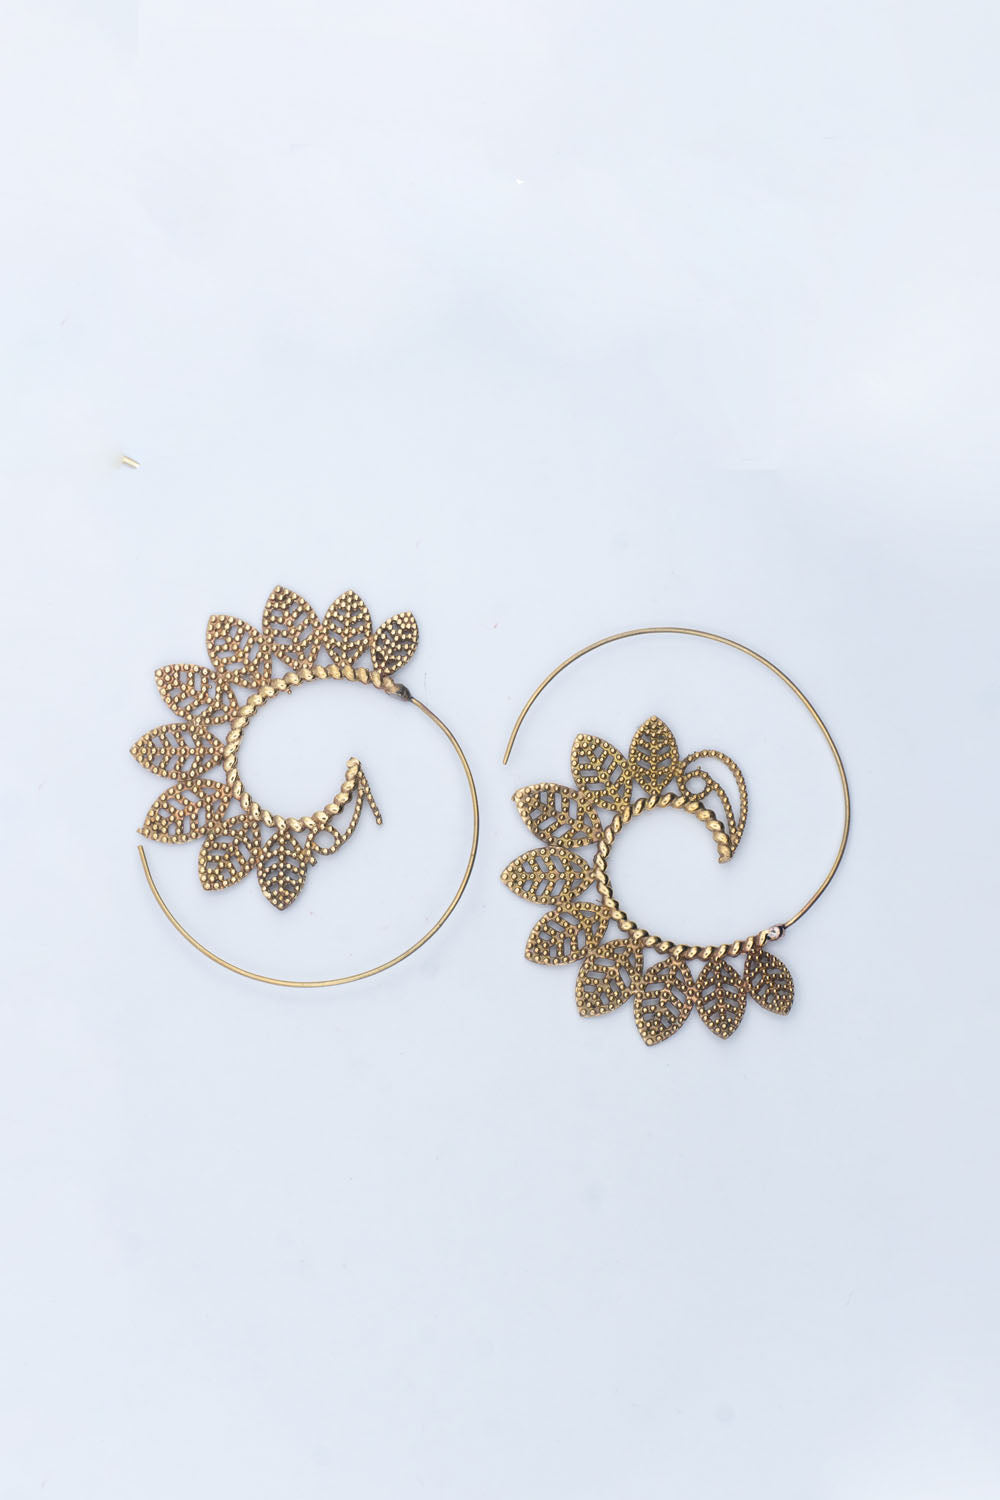 Dotted Leaf Spiral Earrings